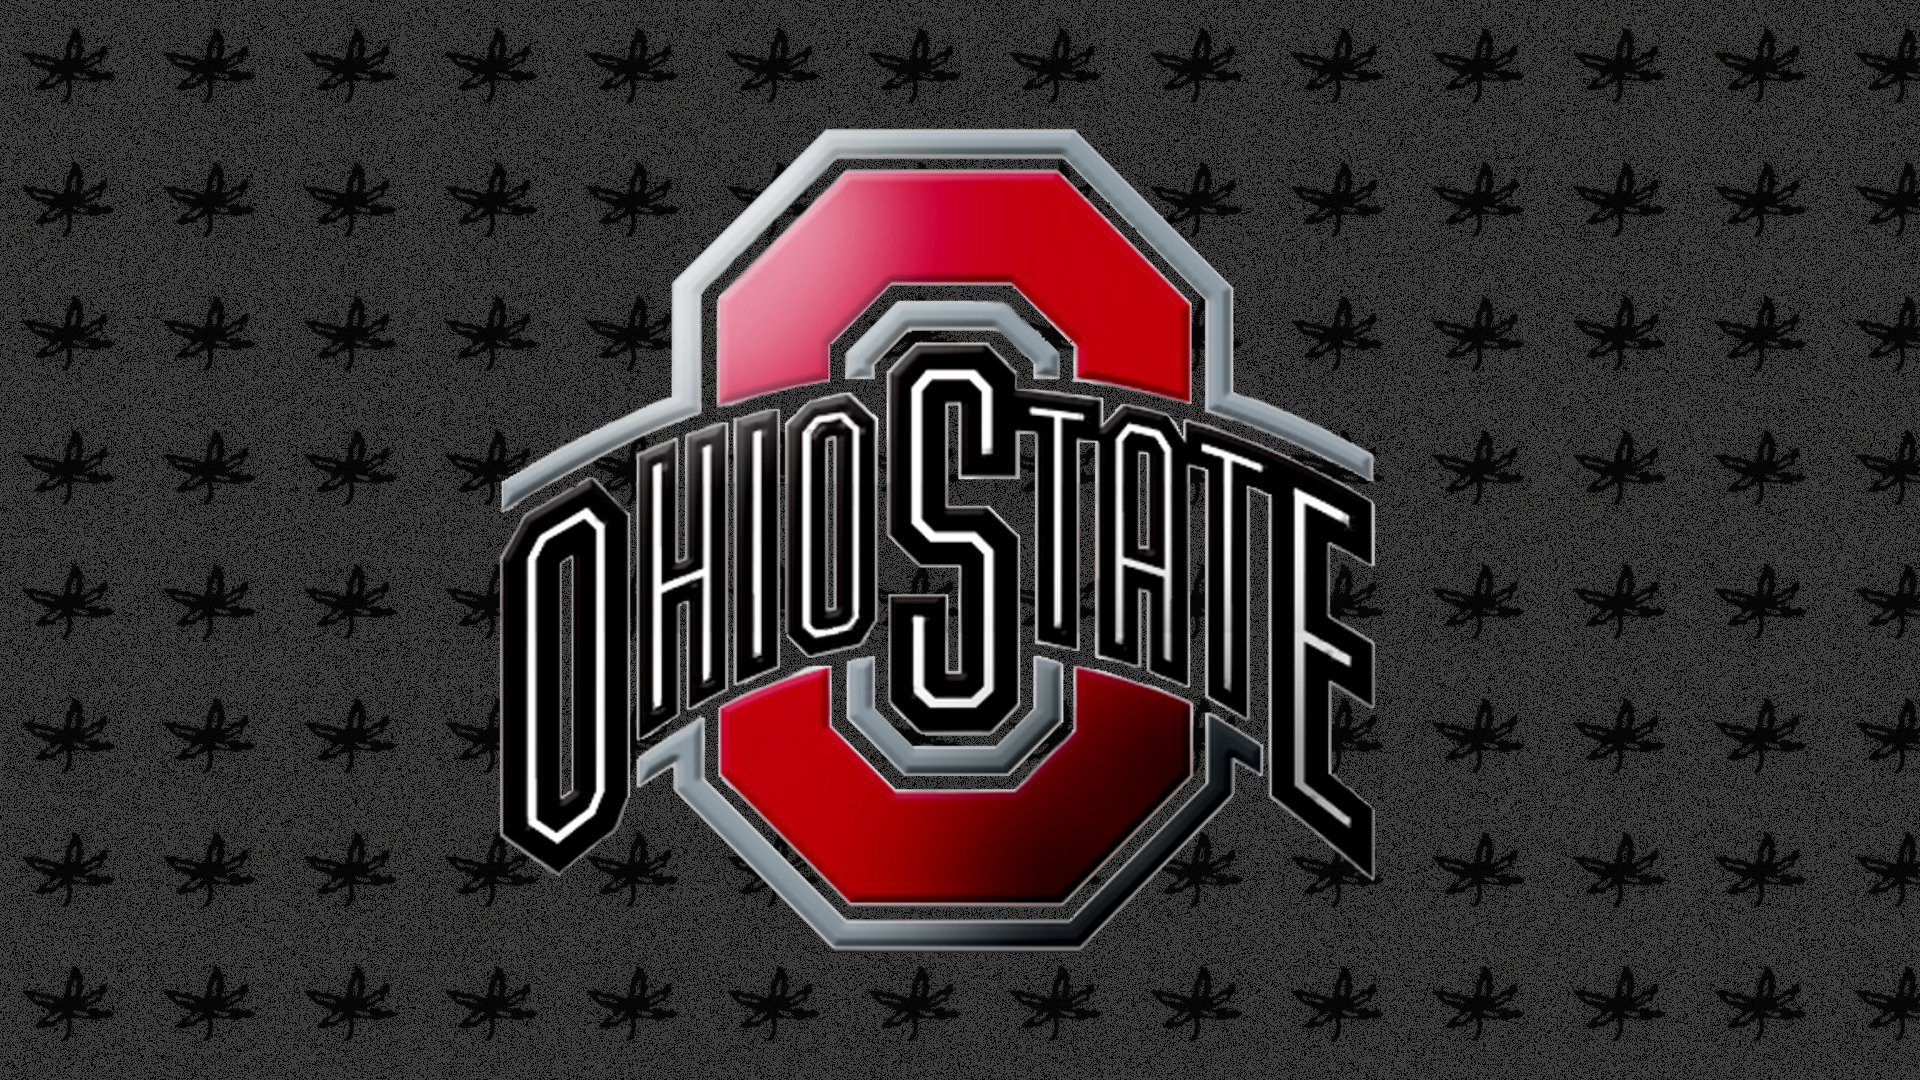  swagg university ohio state image swagg university ohio state pictures